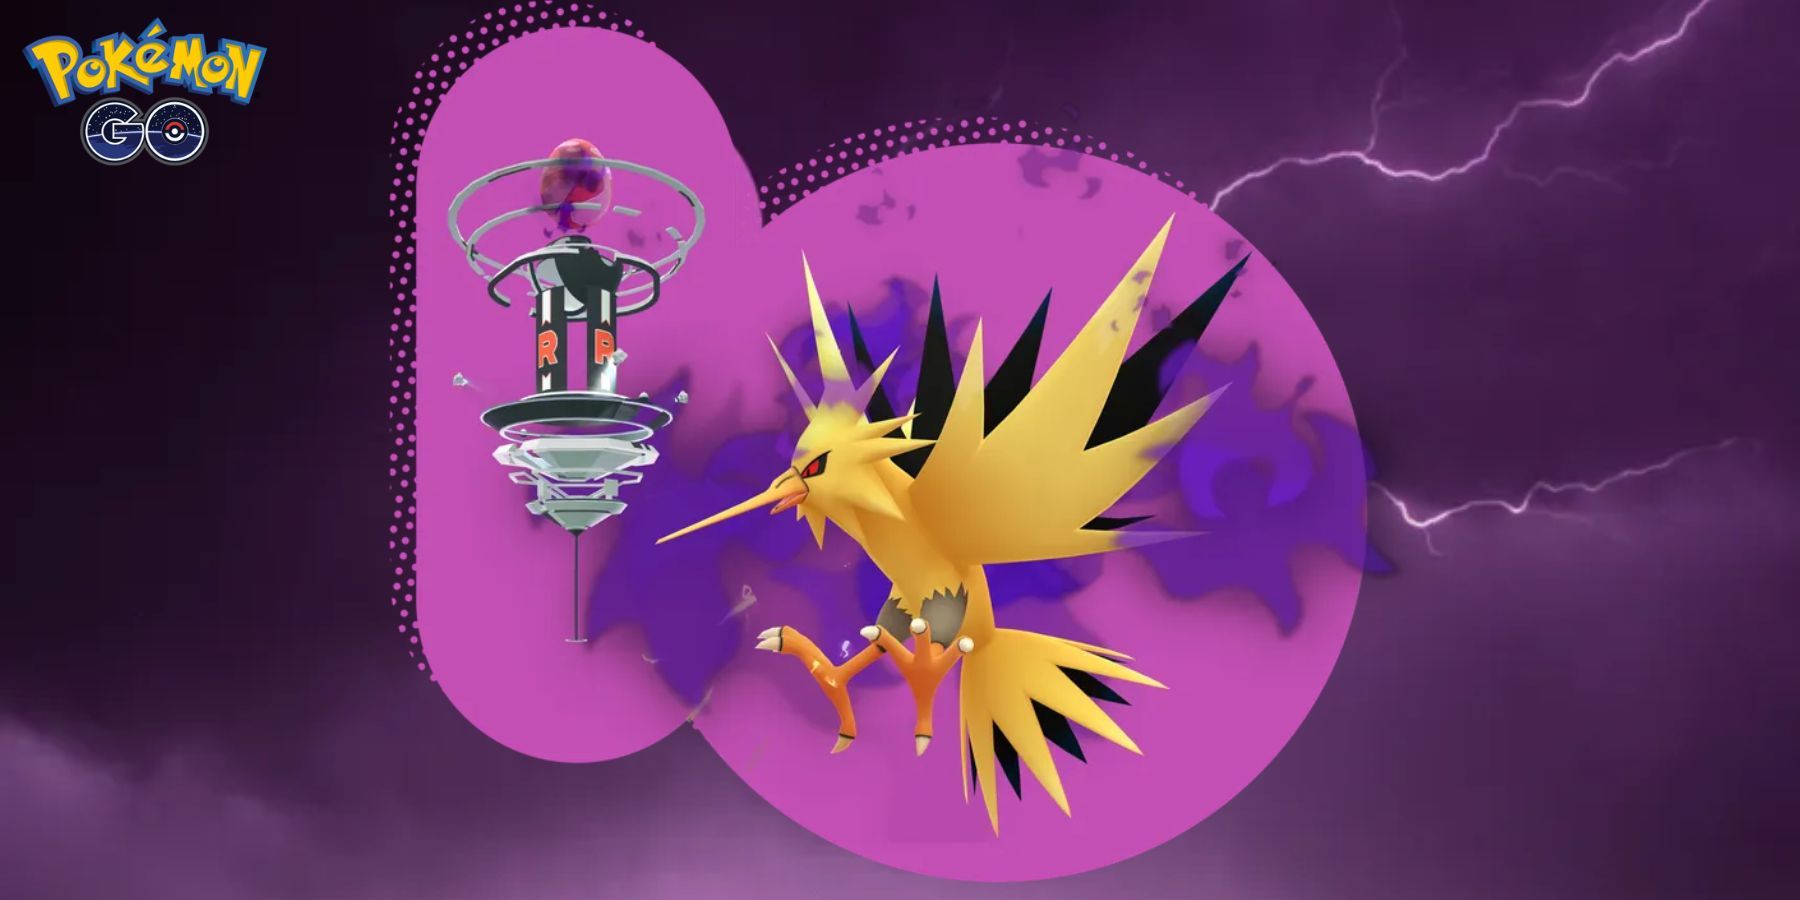 Pokemon GO Shadow Zapdos raid guide: Weaknesses, best counters, and more